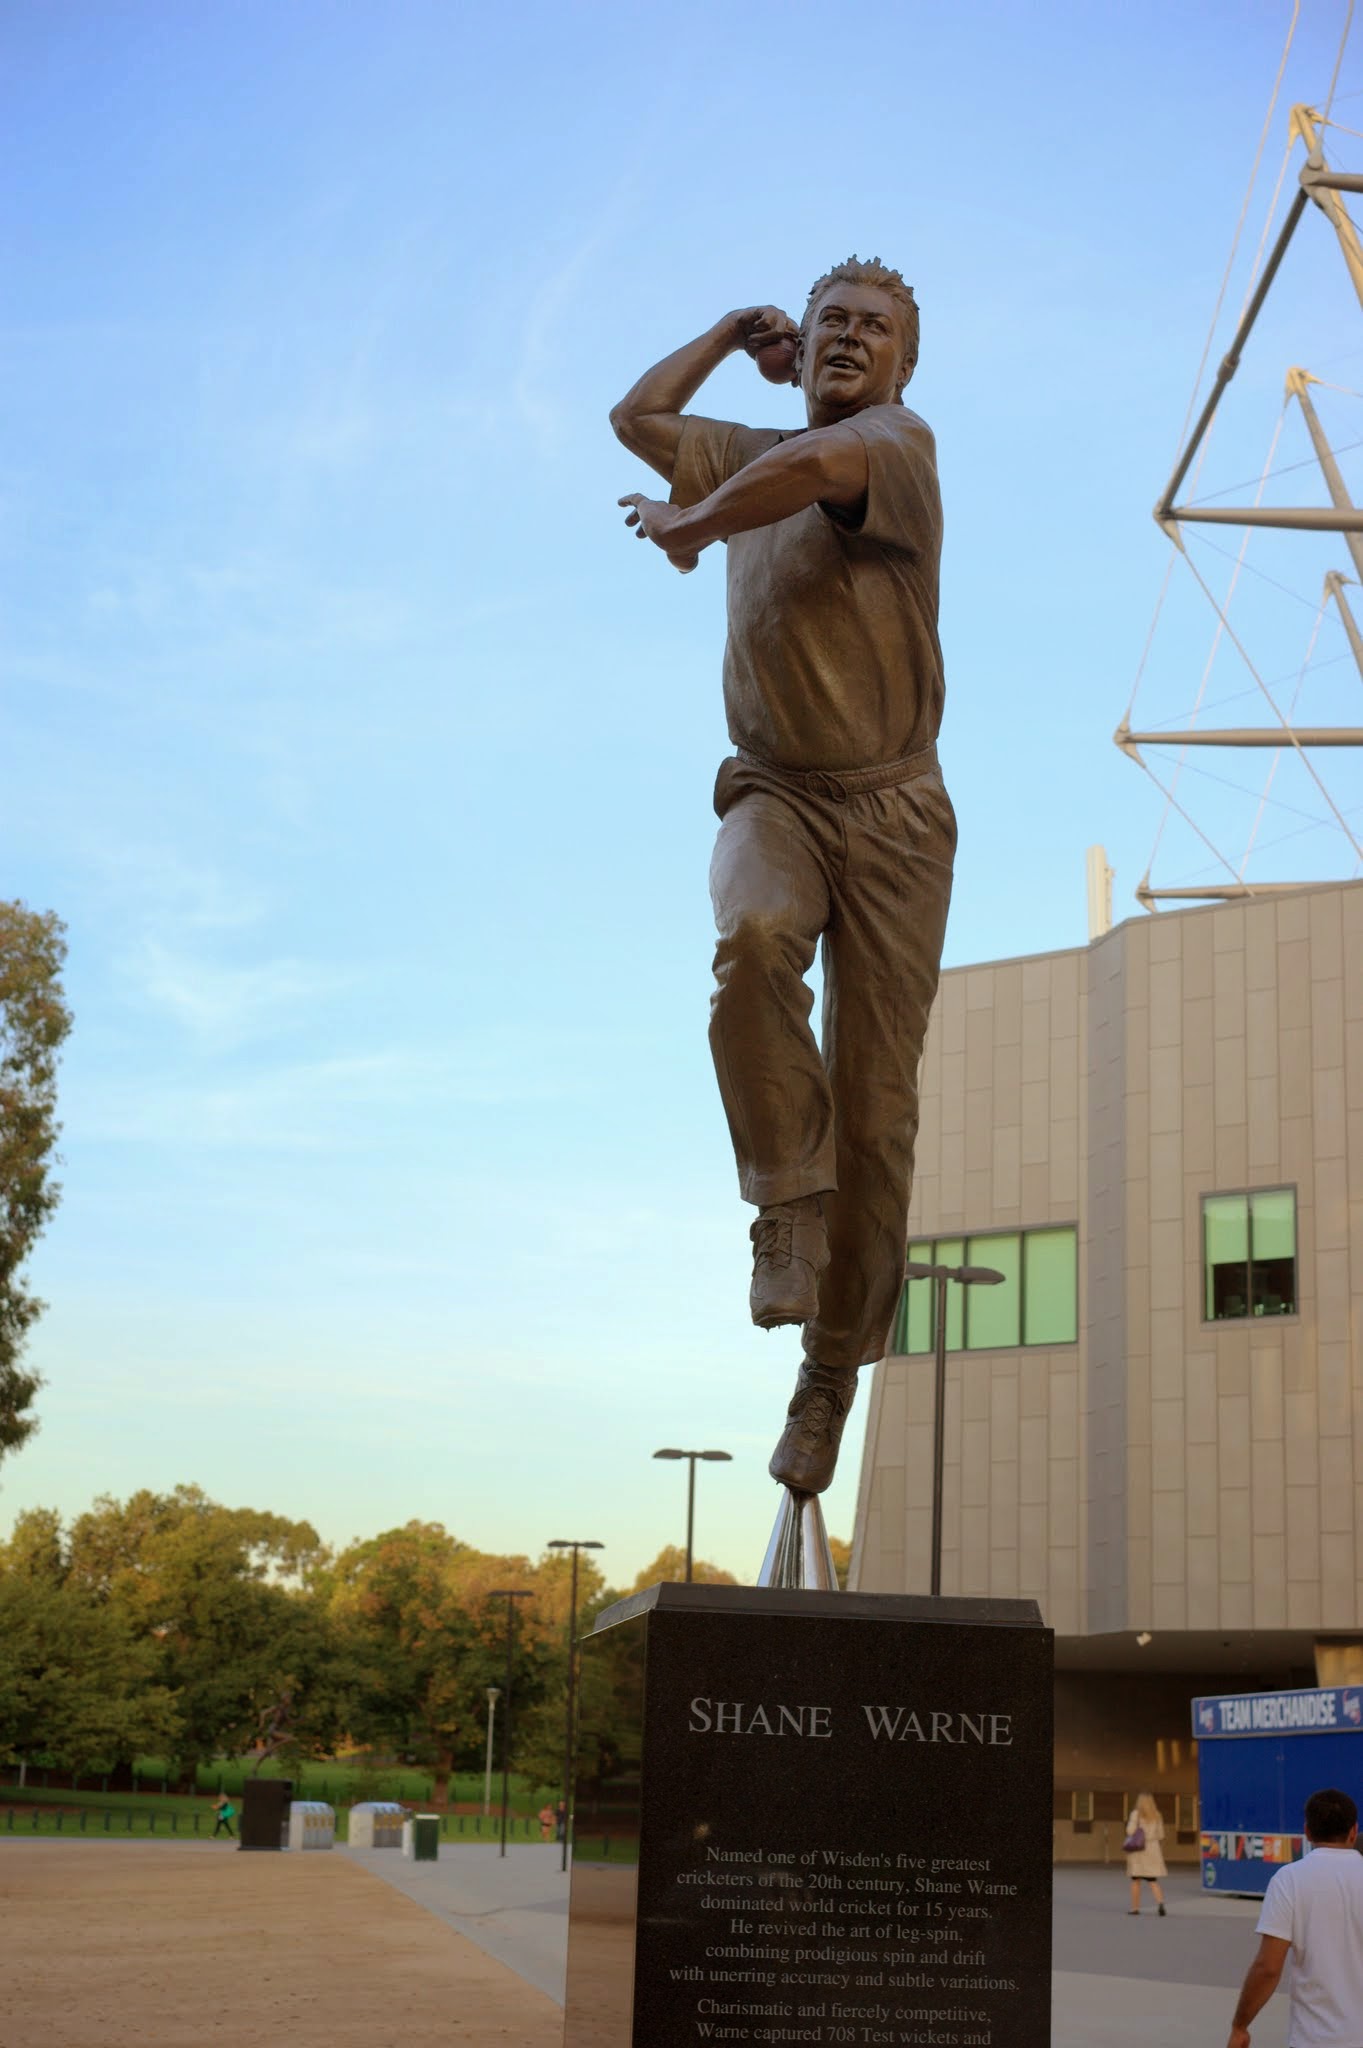 a statue of a man throwing a baseball